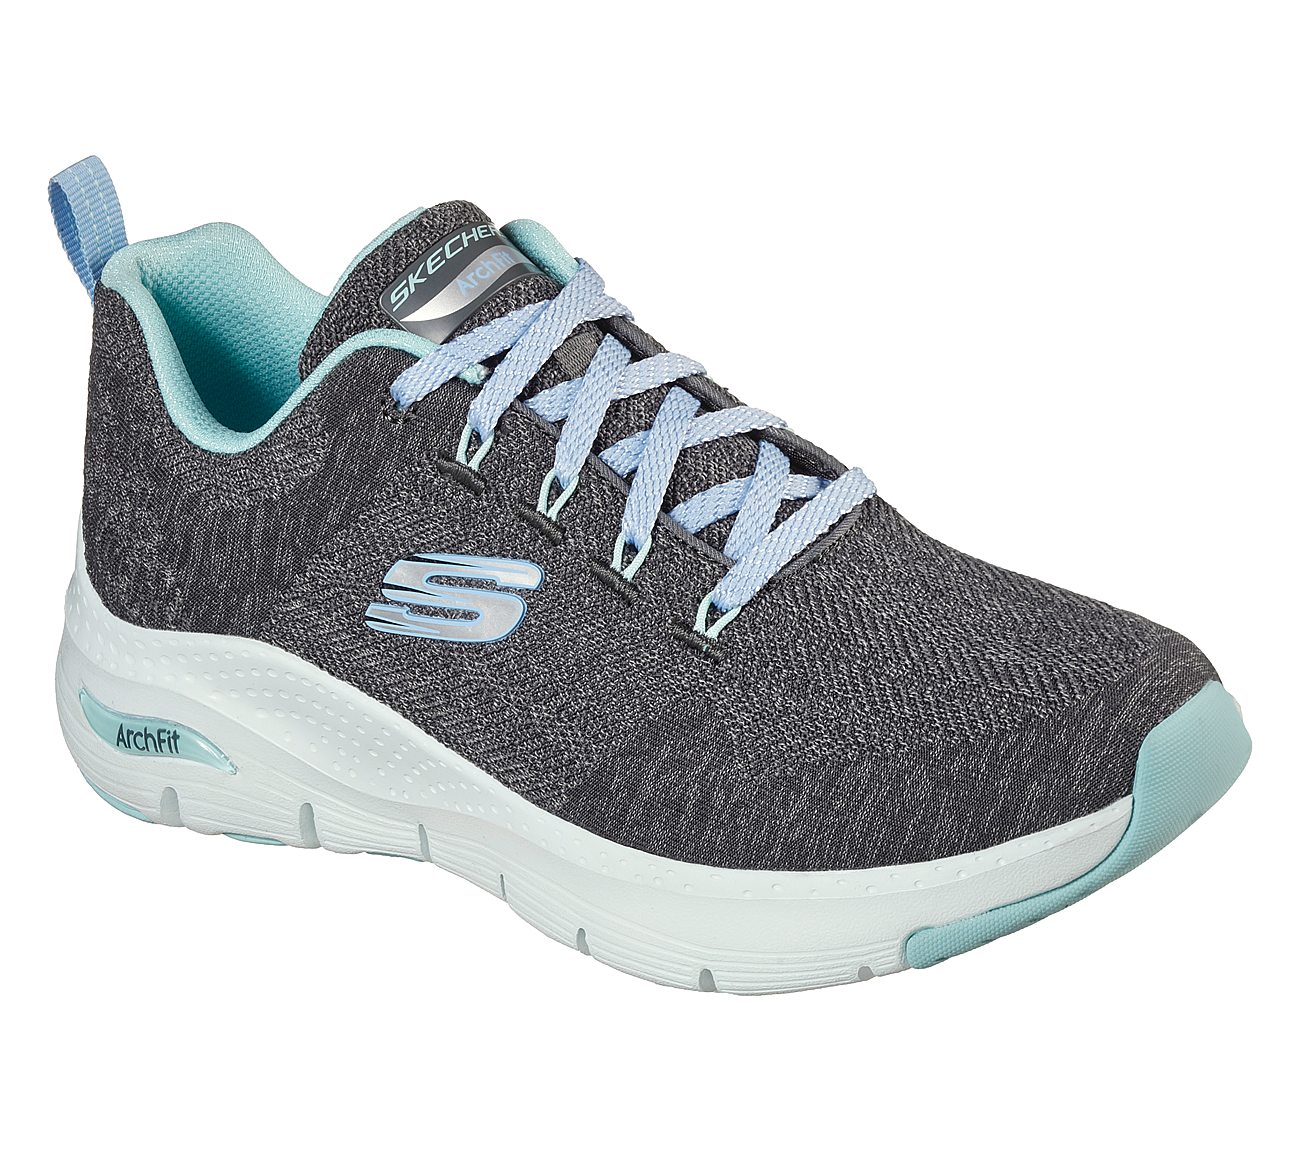 ARCH FIT-COMFY WAVE, CHARCOAL/TURQUOISE Footwear Right View